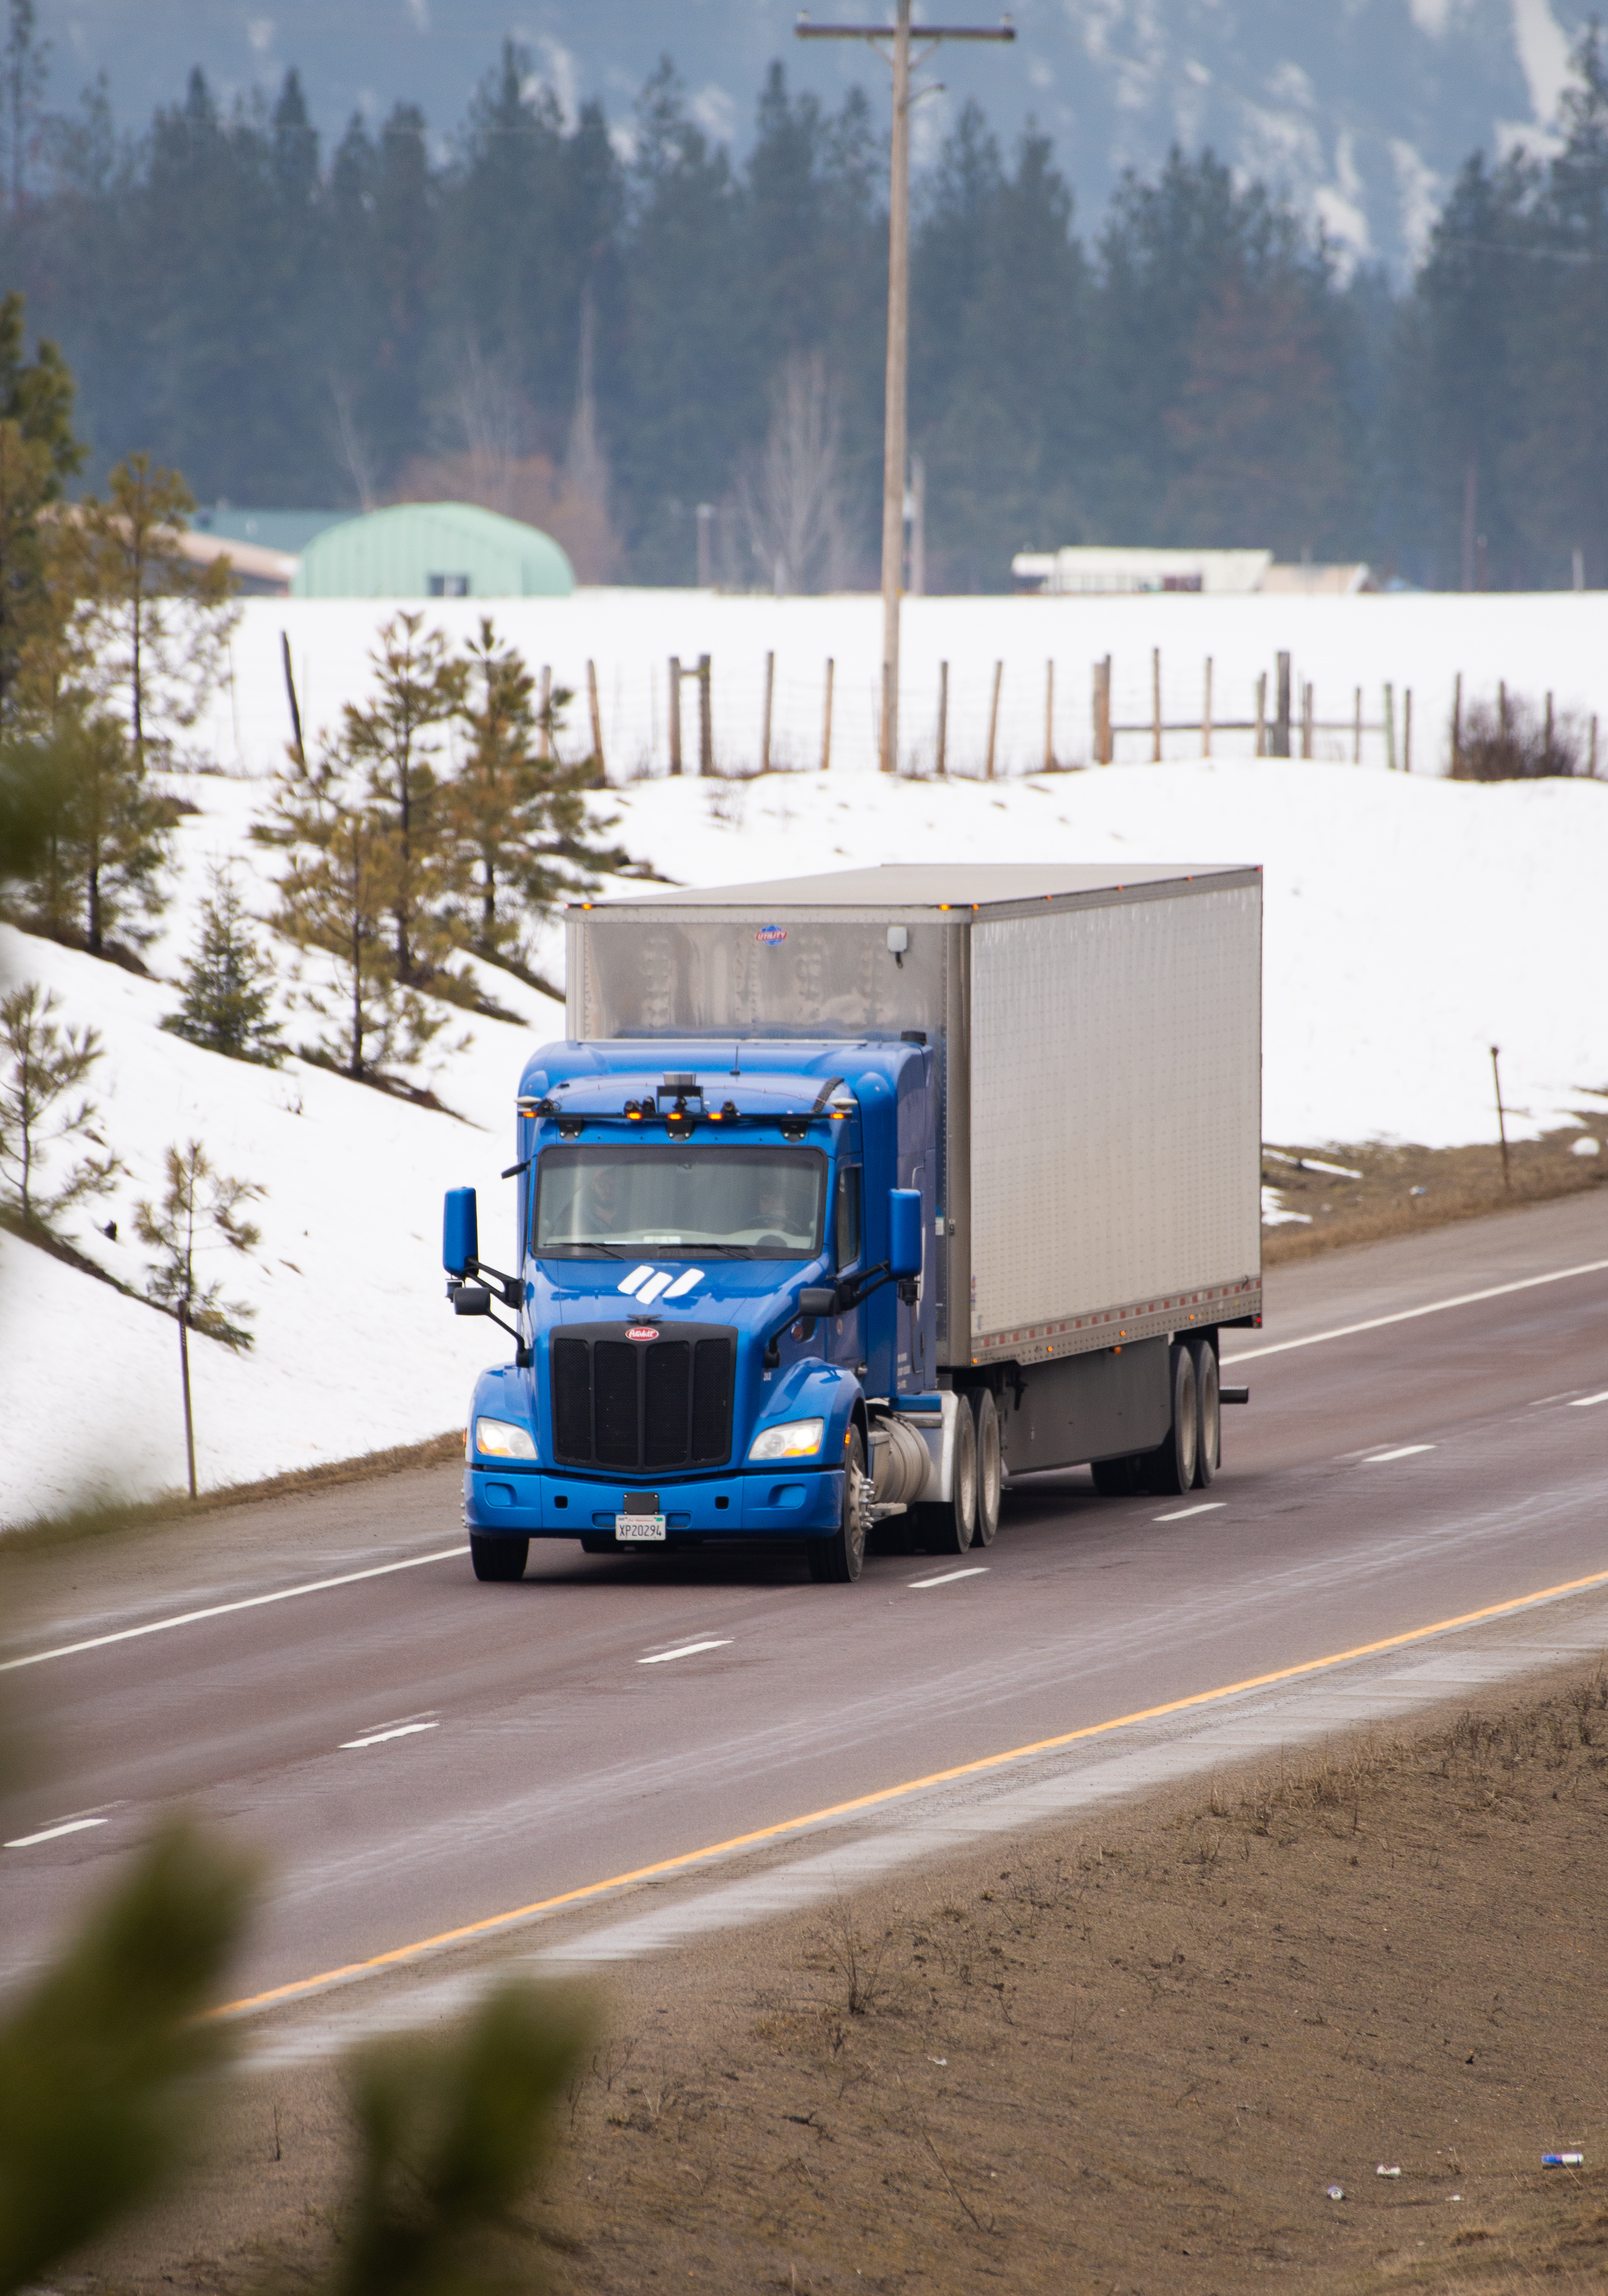 Embark-powered trucks traveled on a 60-mile round trip route on public roads between Clinton and Missoula.